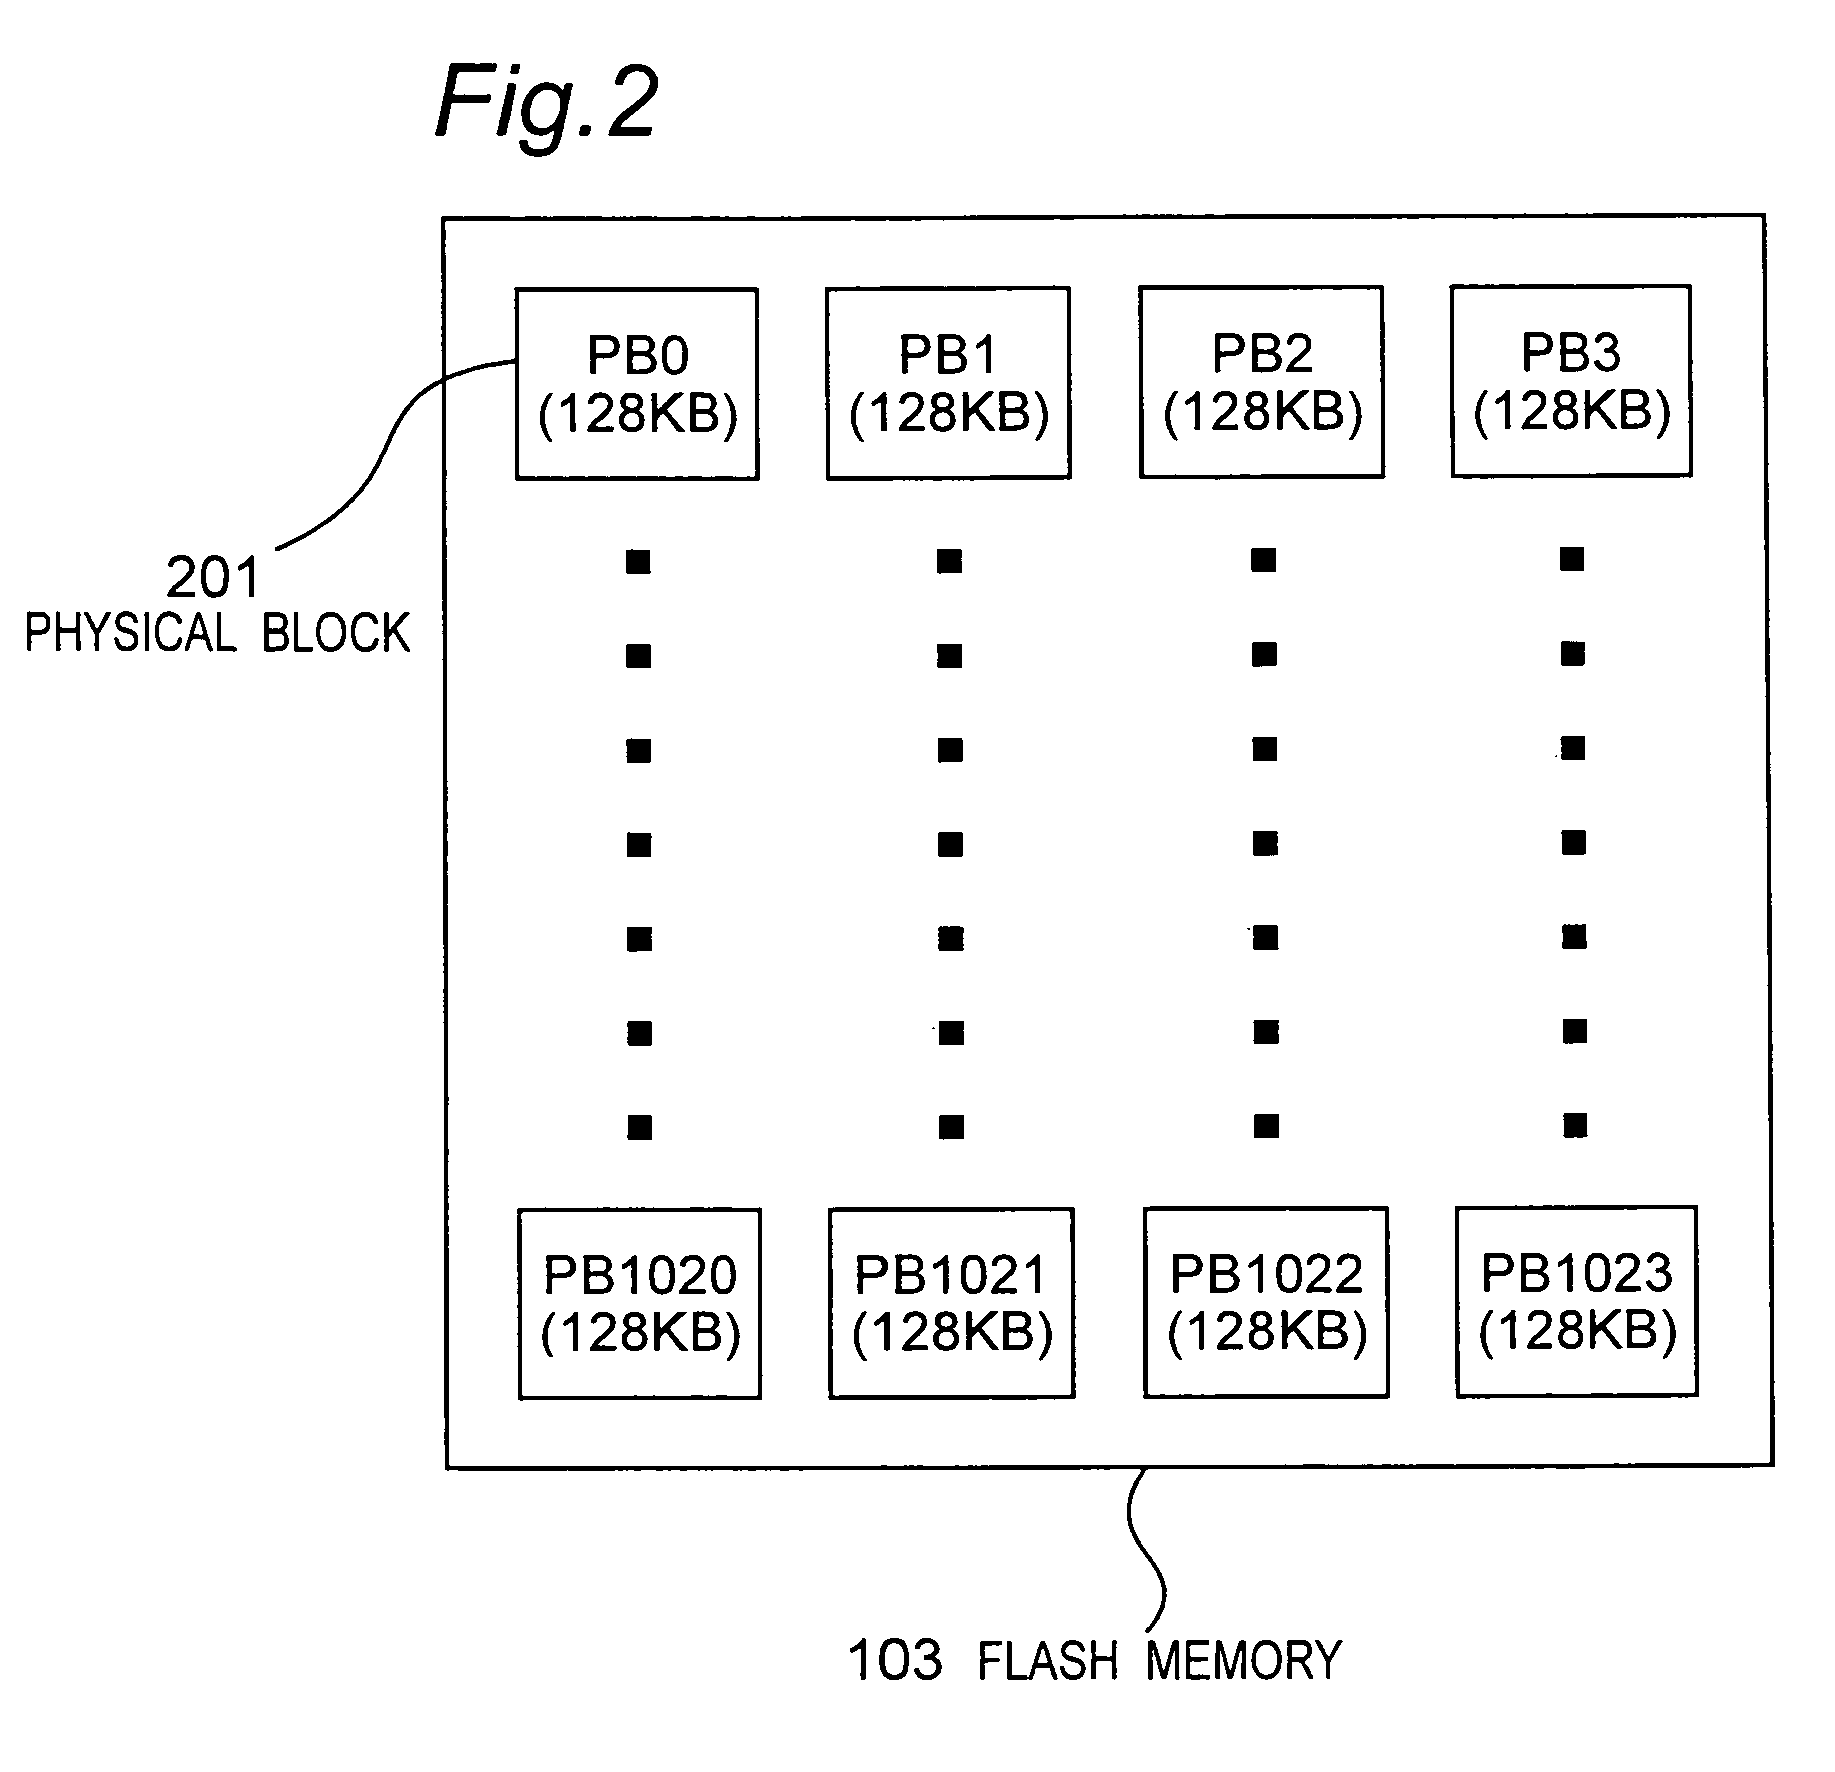 Reduction of fragmentation in nonvolatile memory using alternate address mapping